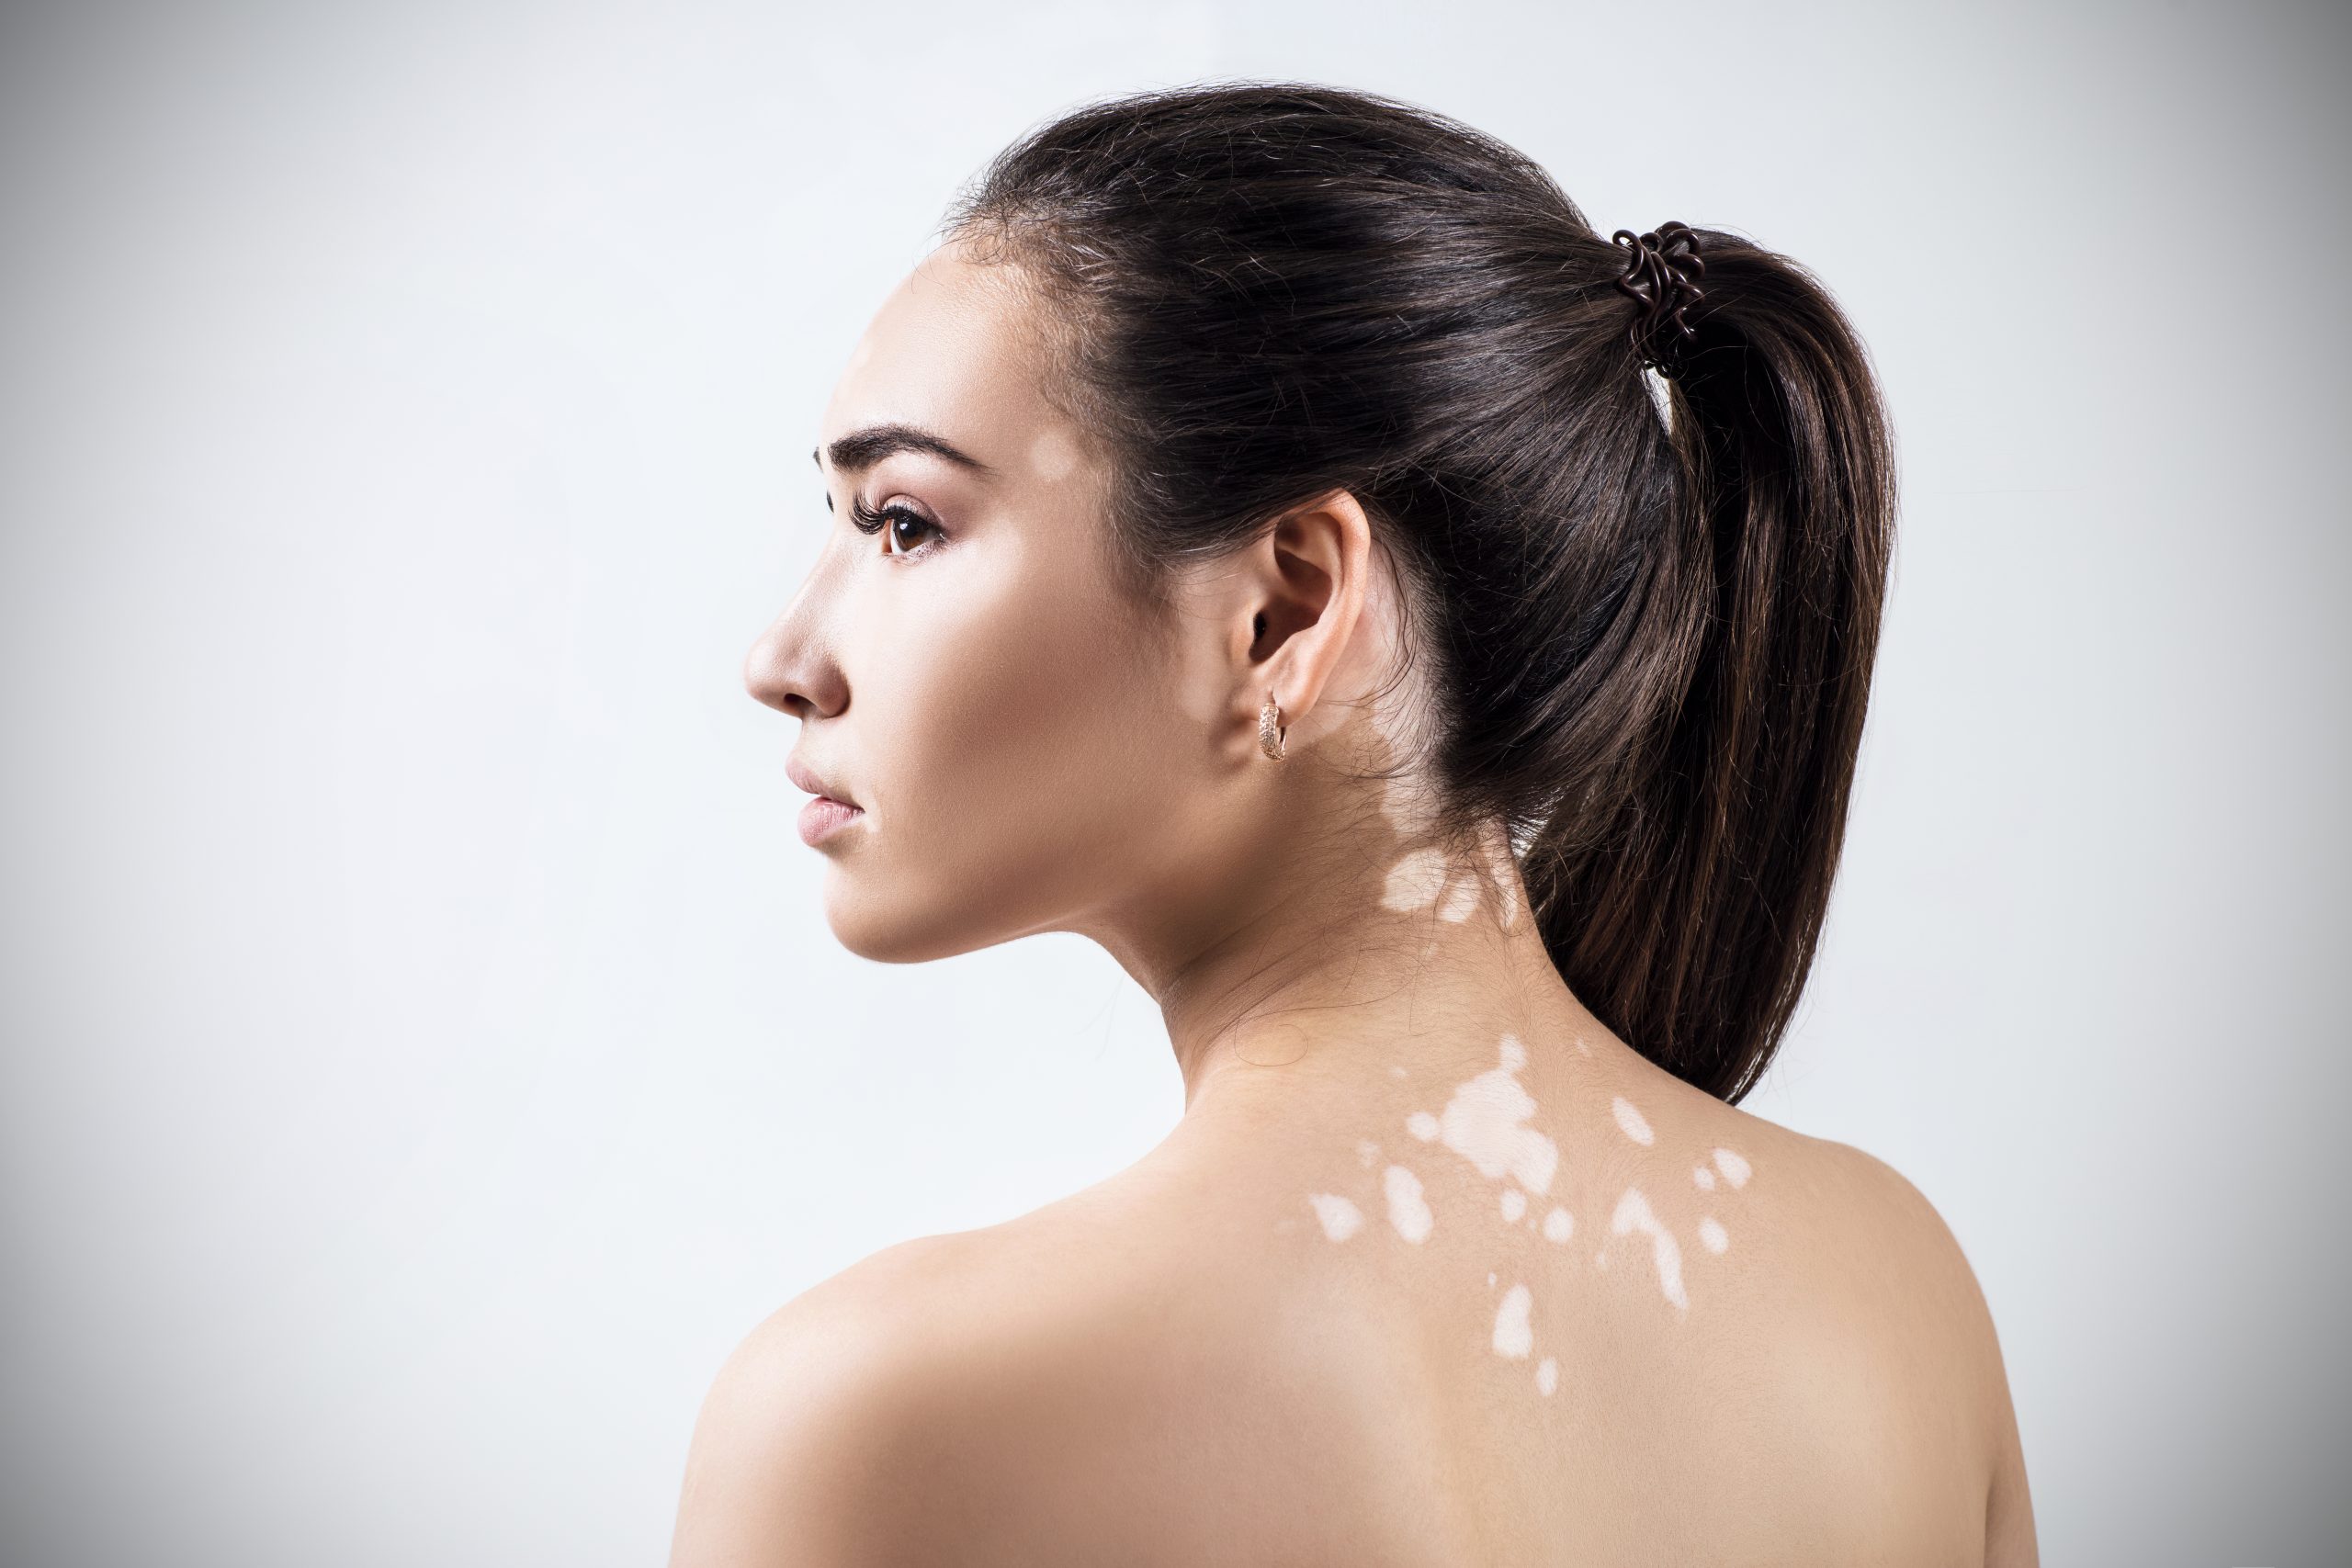 Can Vitiligo be cured in the early stages?